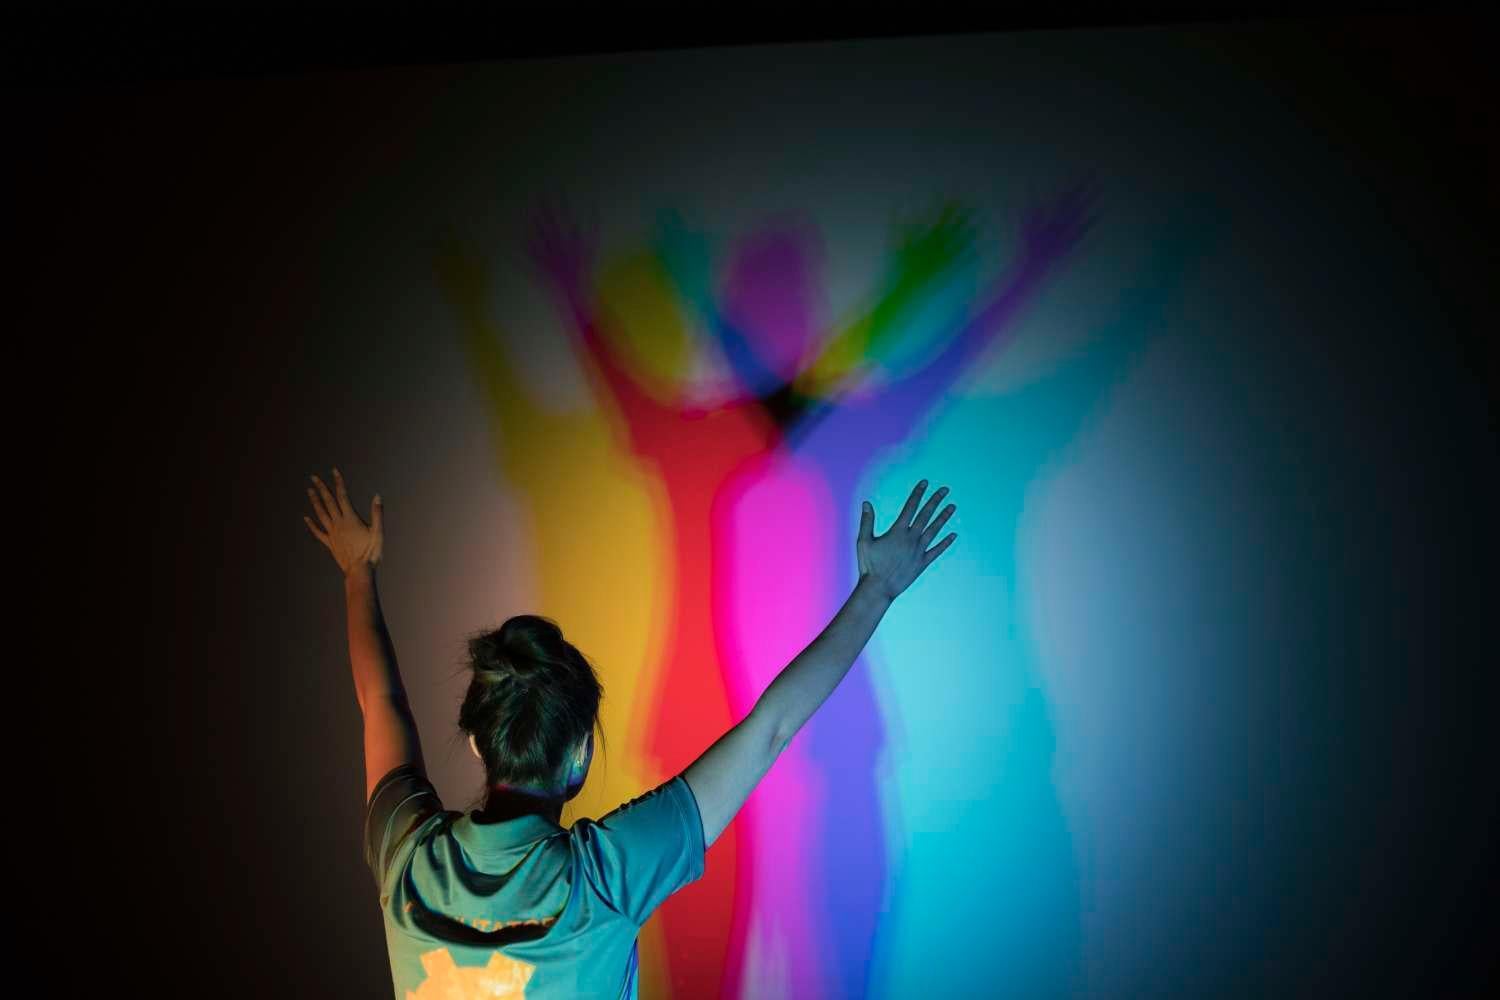 Woman with arms raised views her shadow as a spectrum of colors on wall